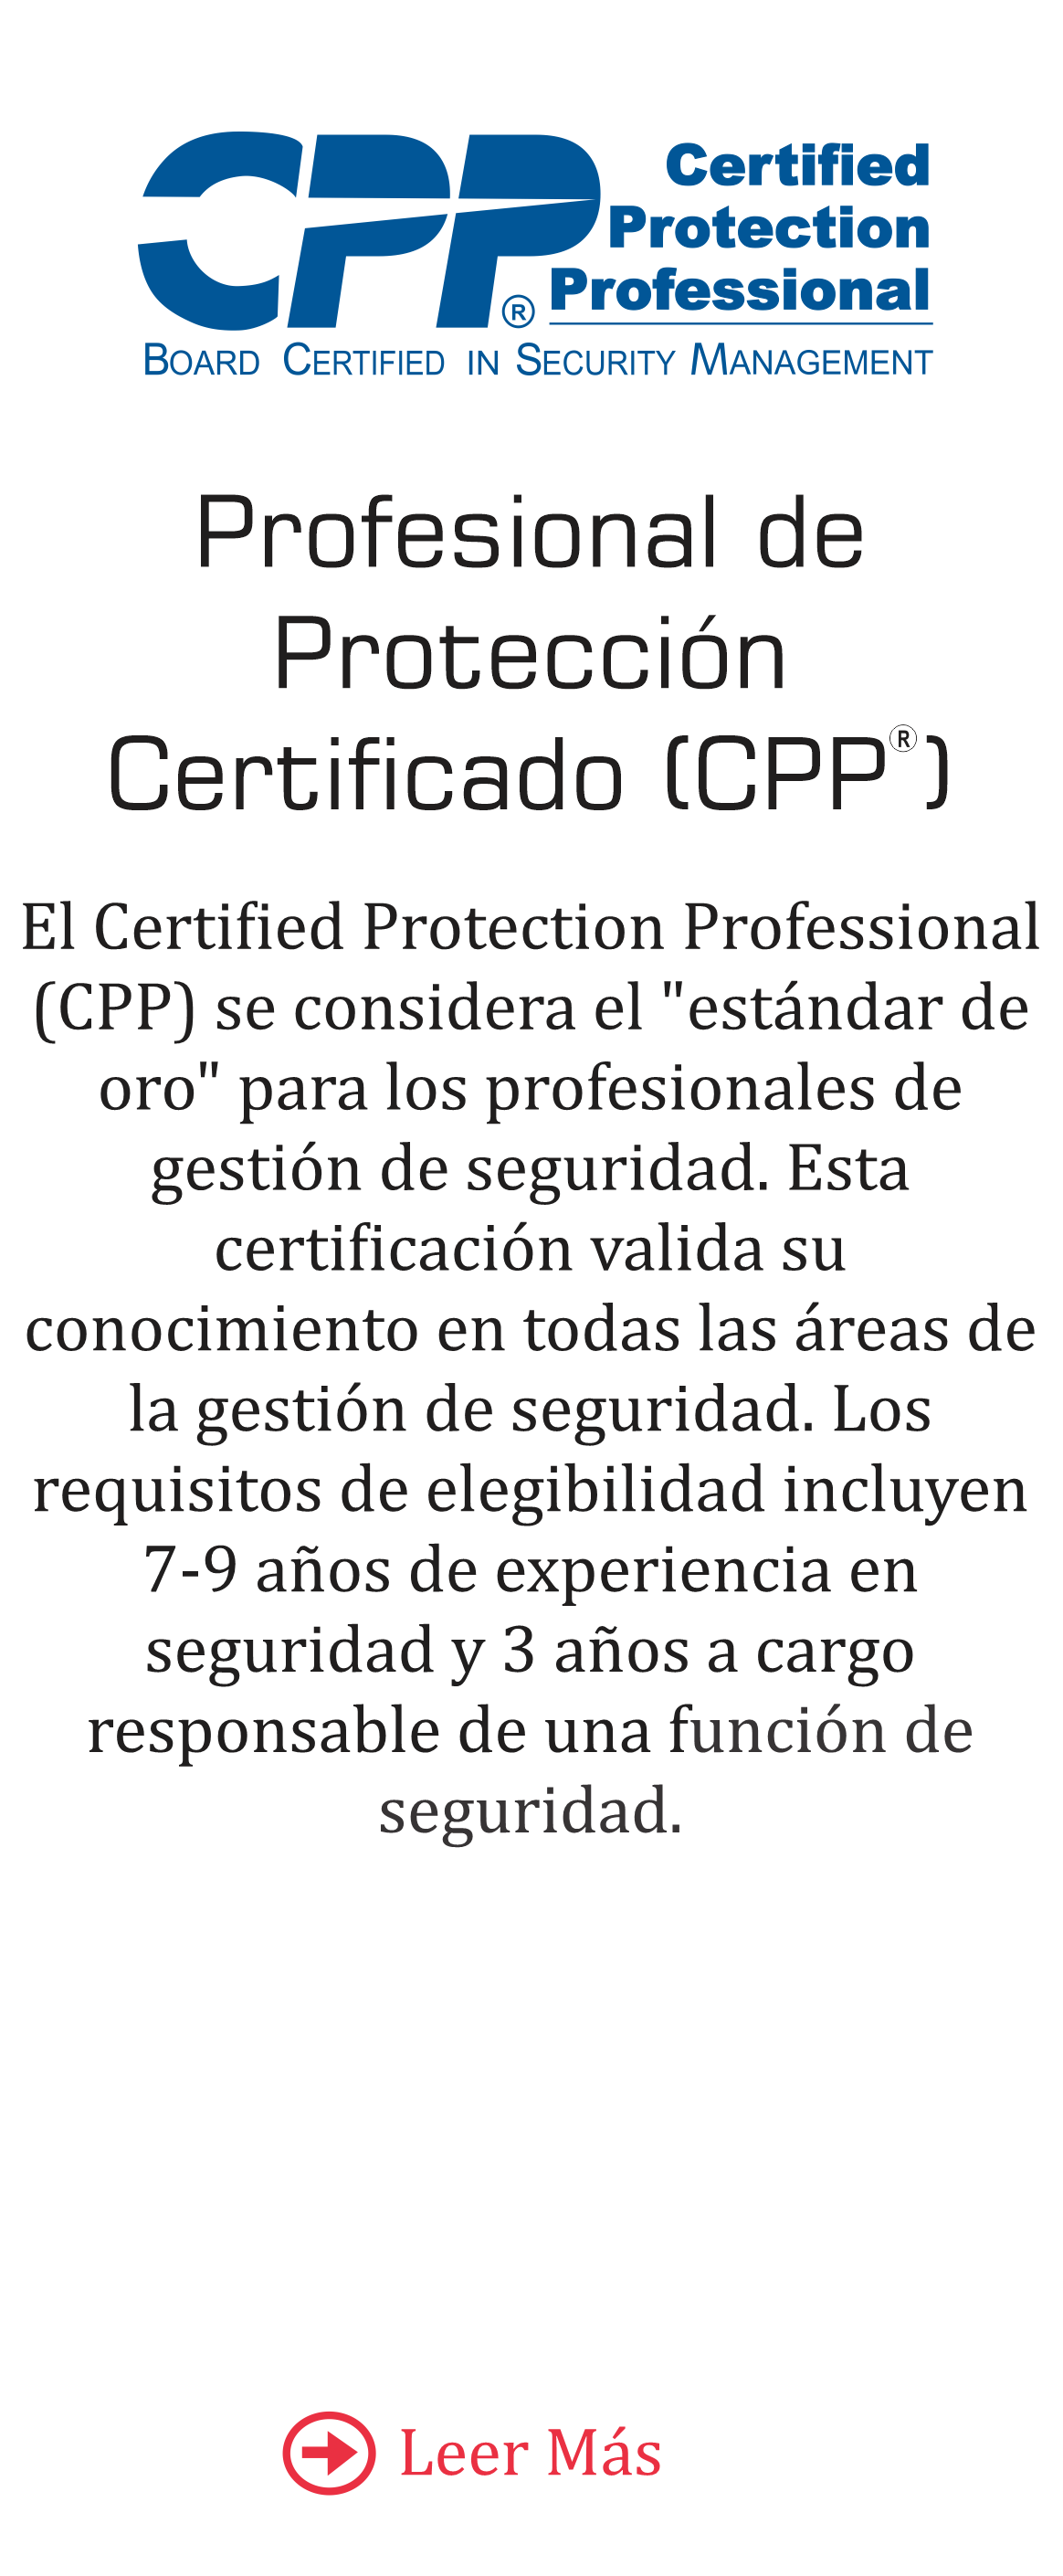 Certified Protection Professional - CPP